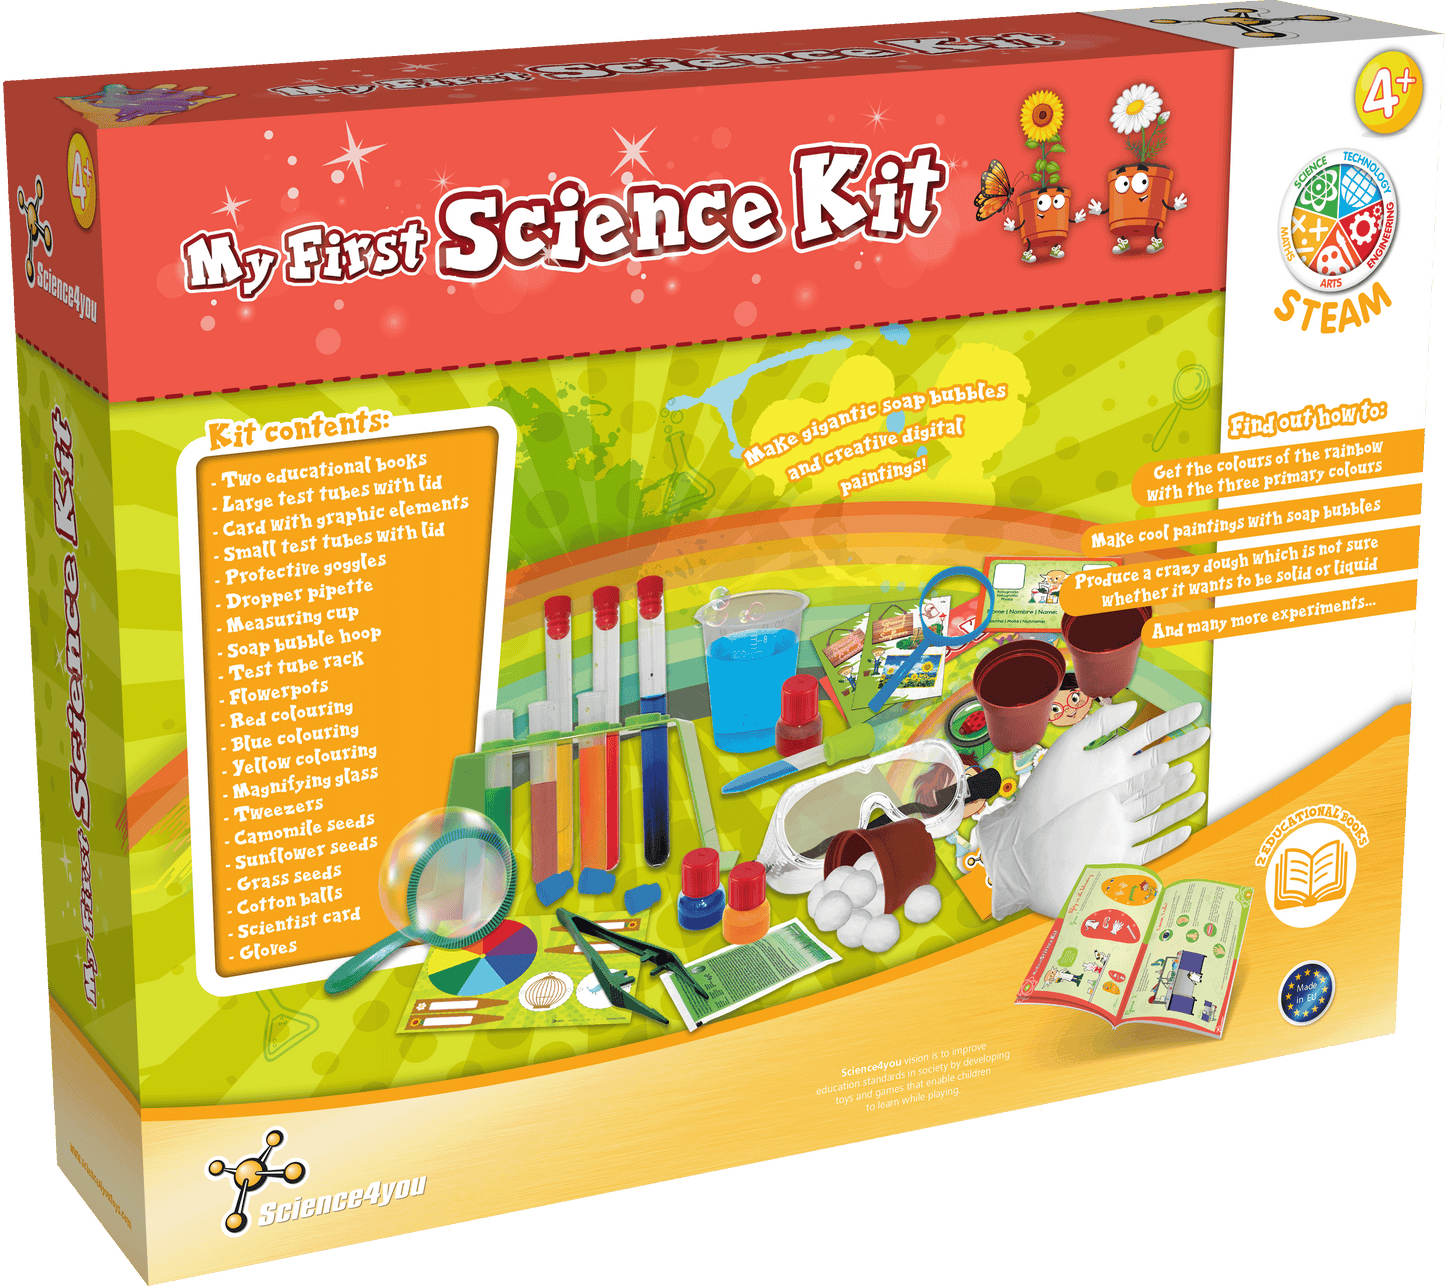 My First Science Kit (TV Ad)  (80003266)